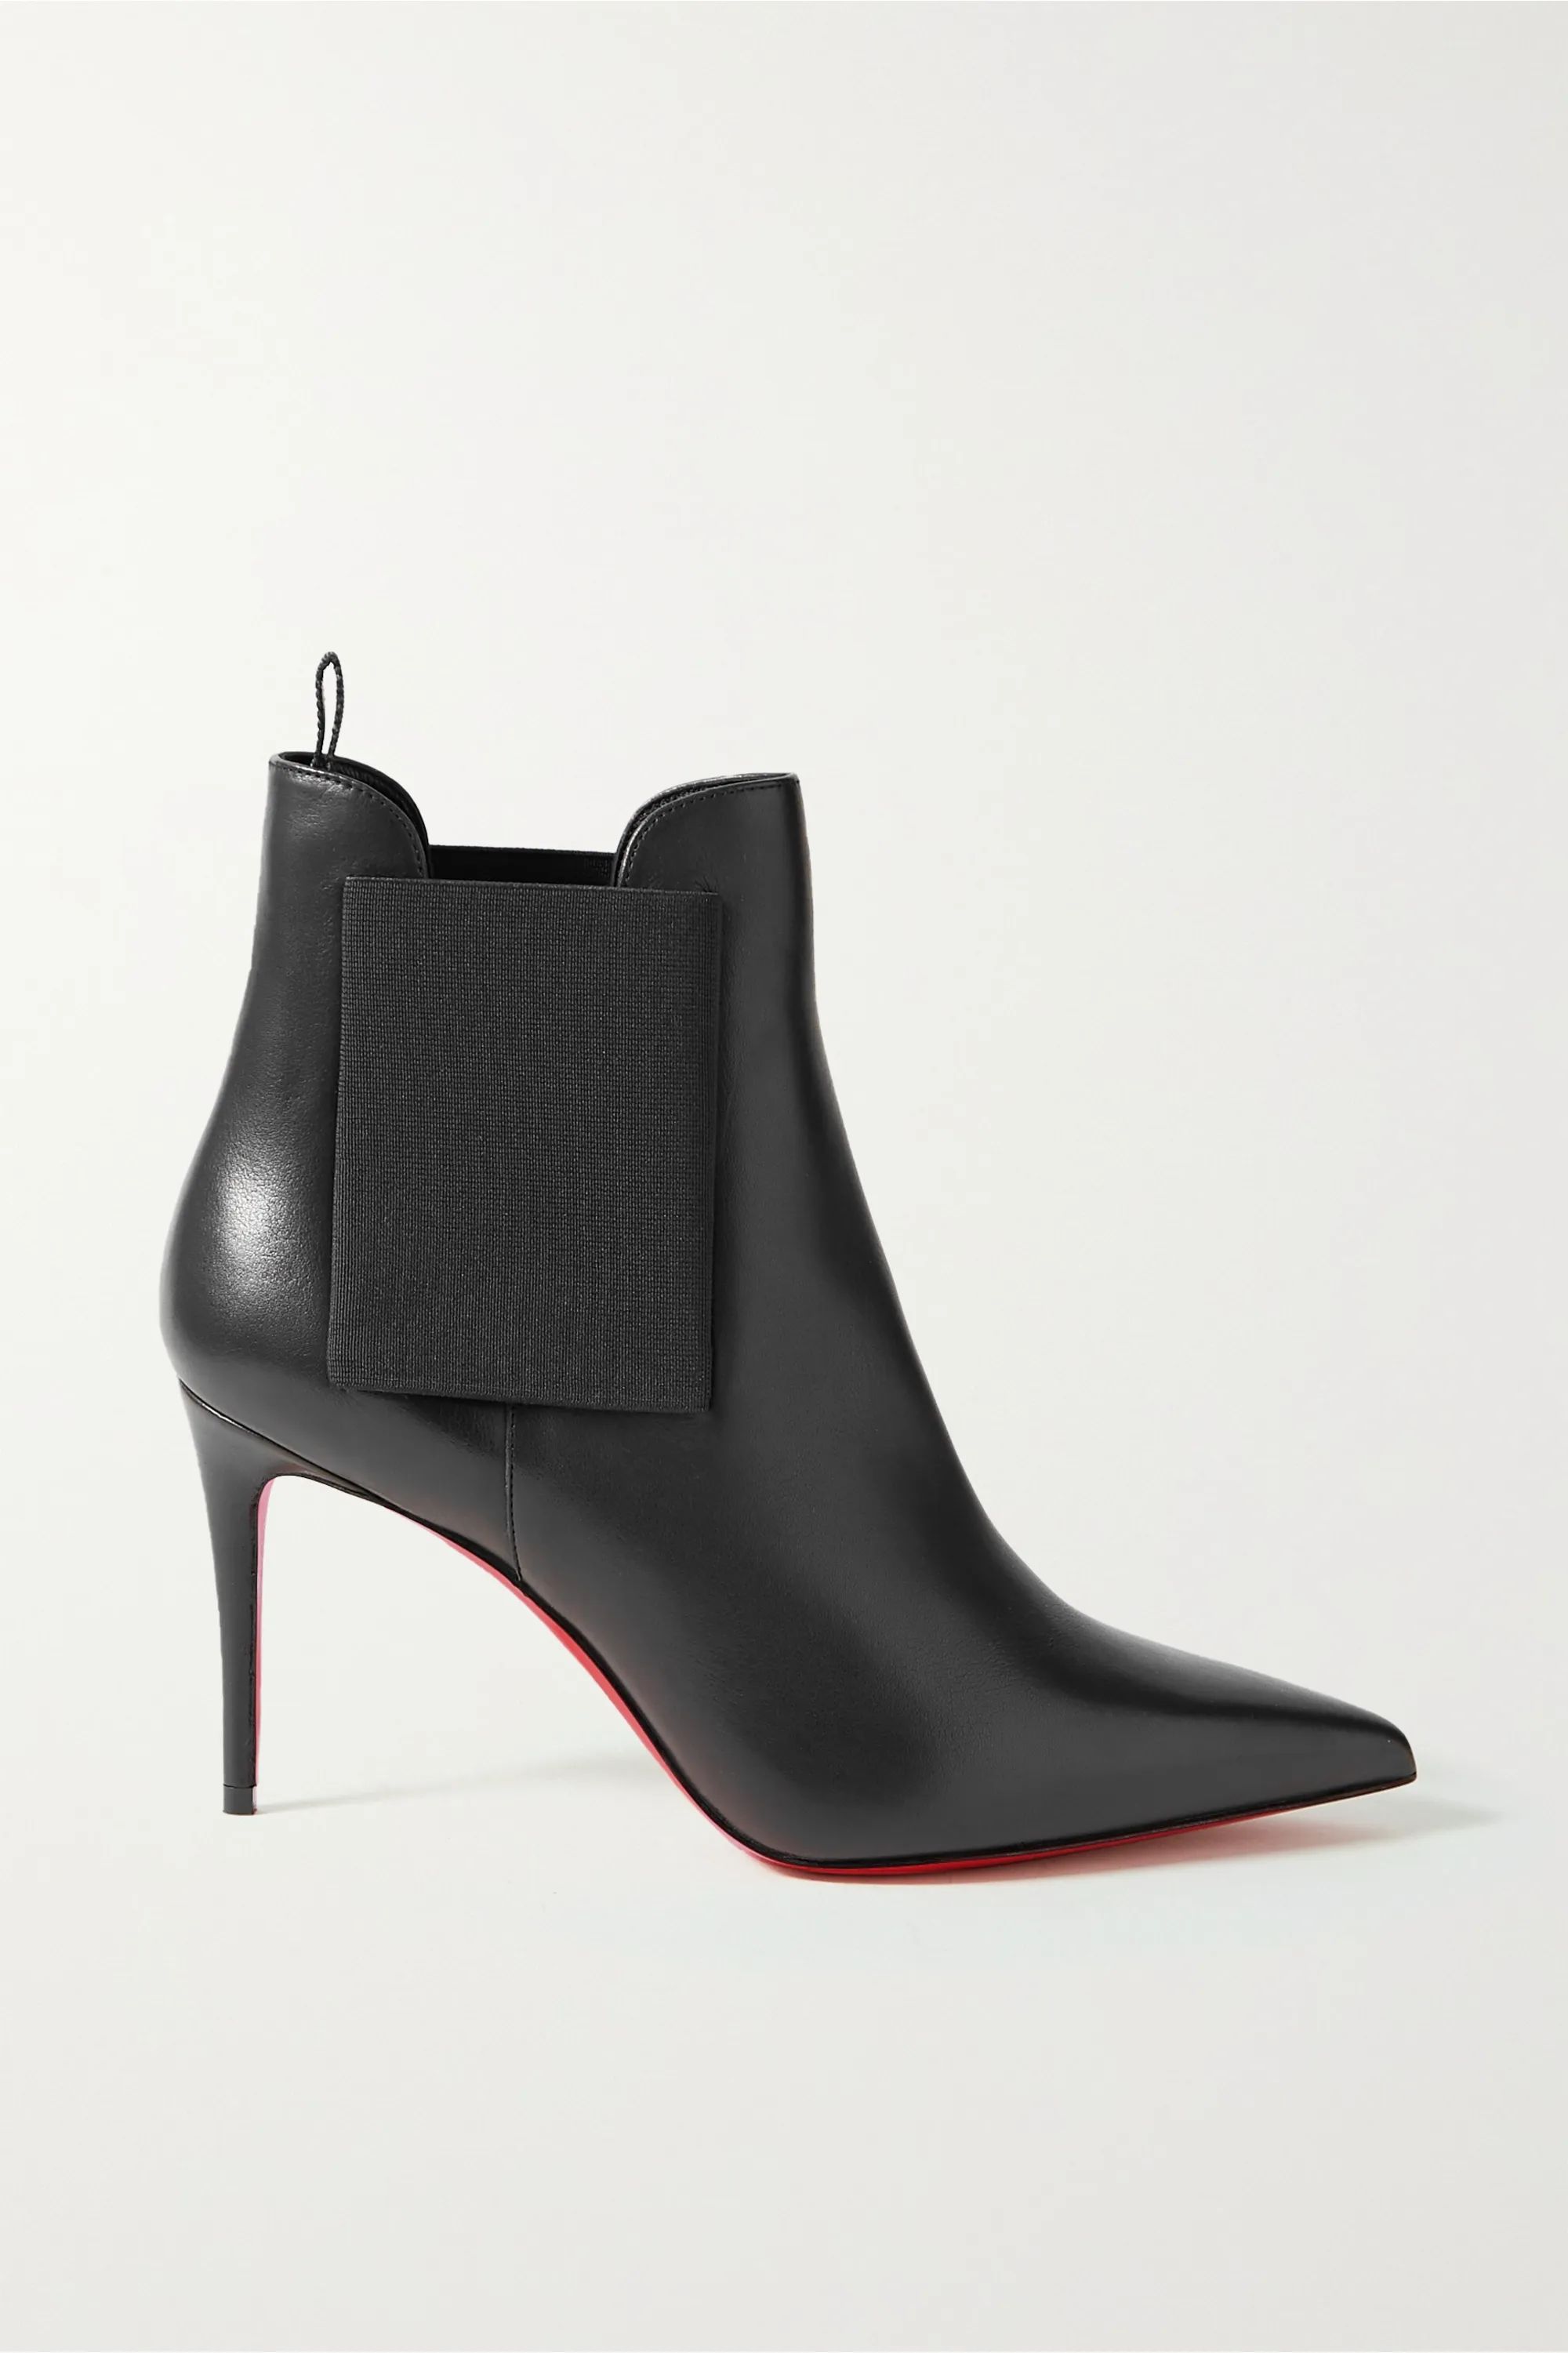 Christian LouboutinCarnababy 85 leather ankle boots | NET-A-PORTER (US)